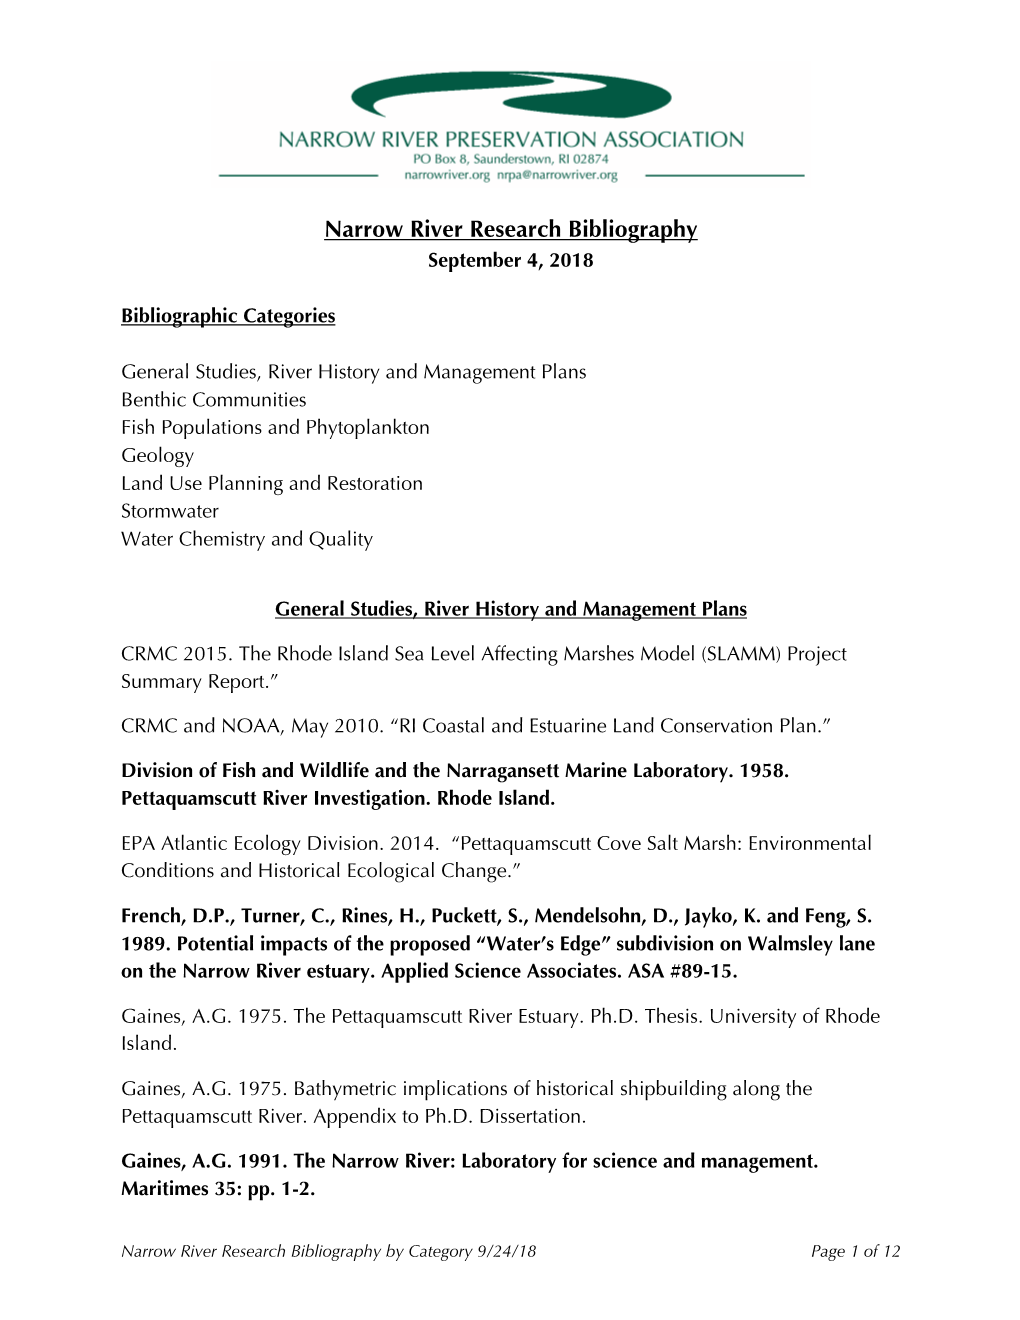 2018 09 04 Narrow River Research Bibliography by Category